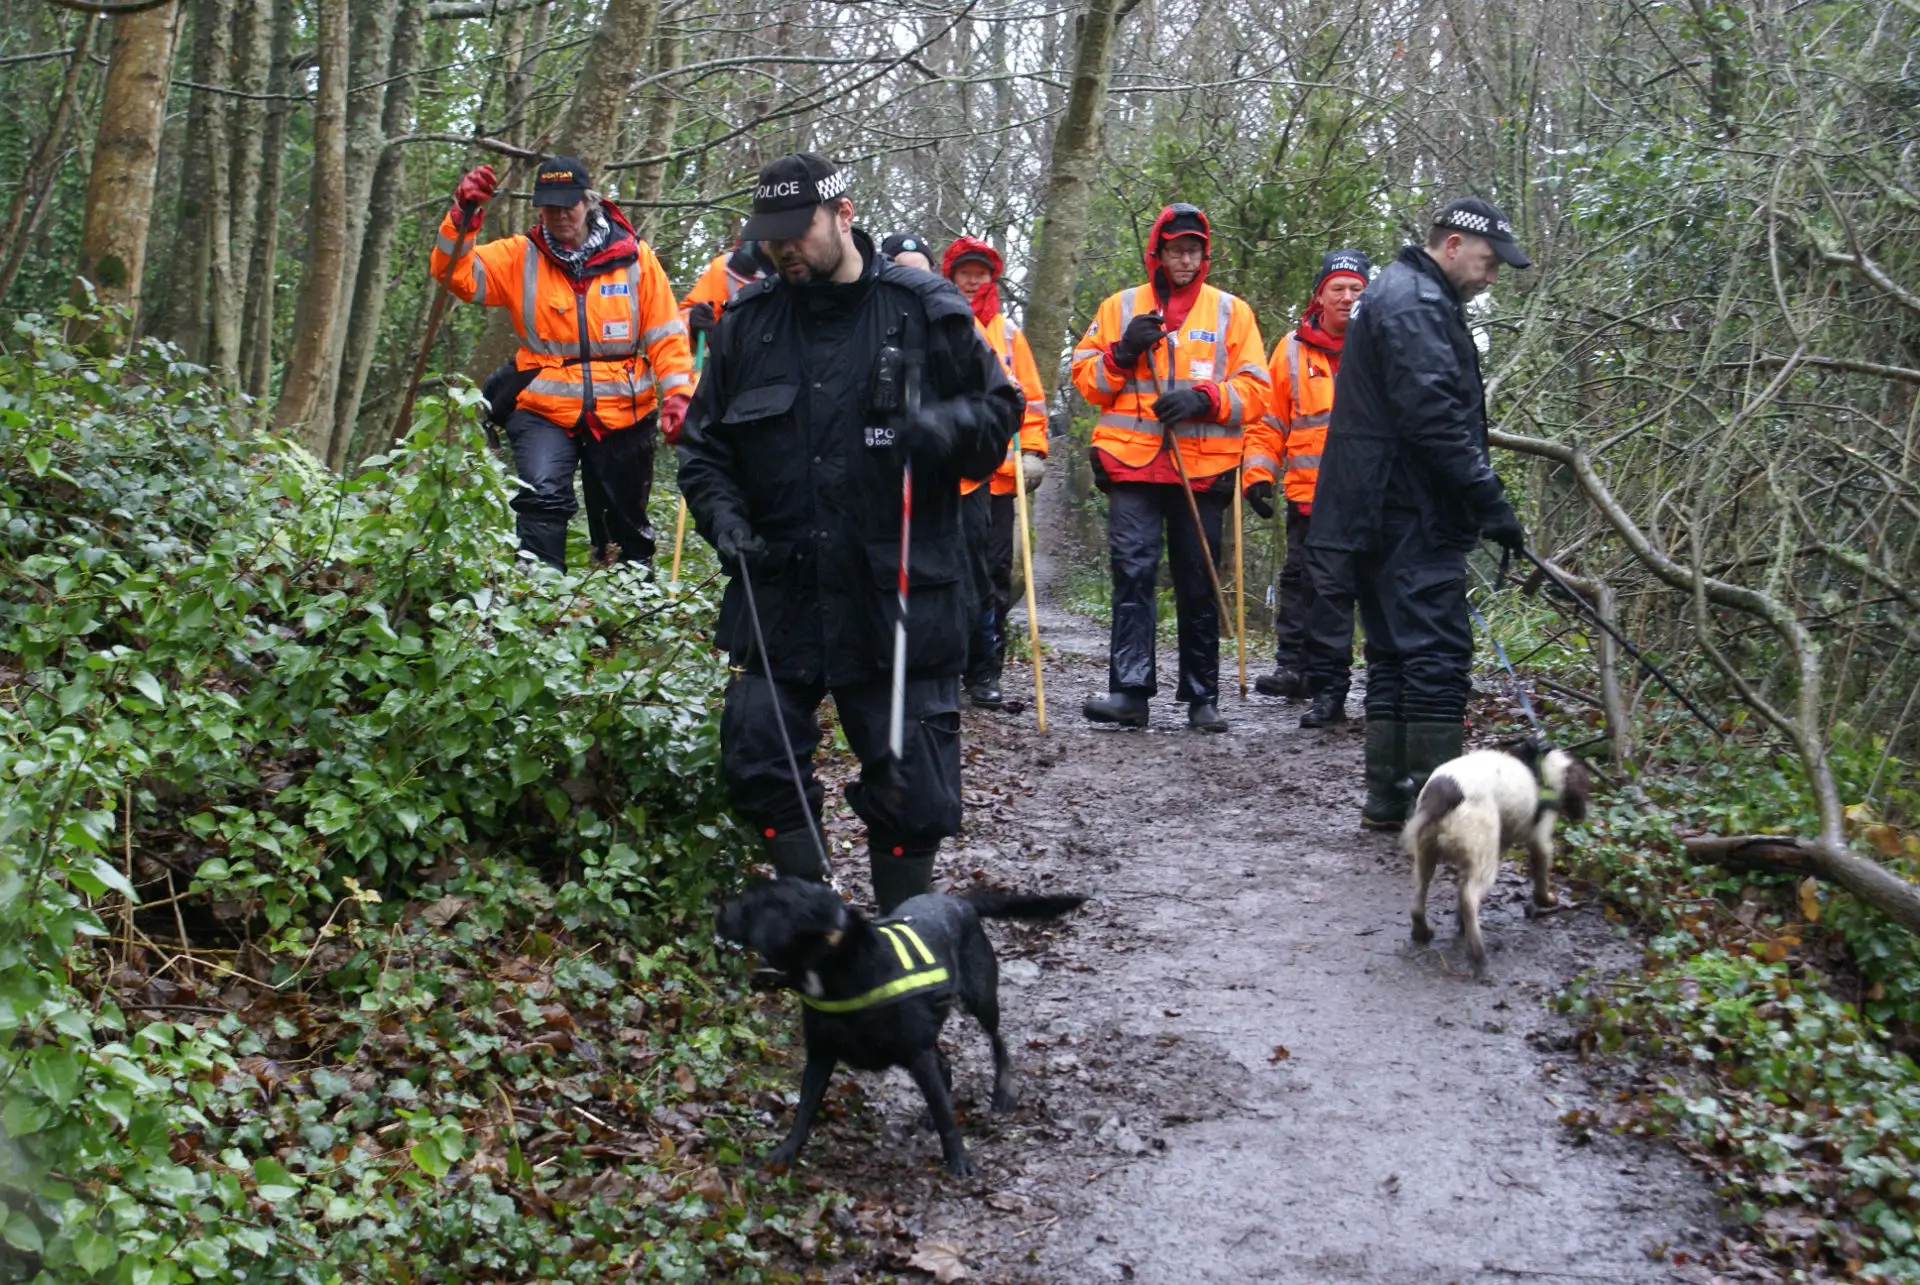 Police and Wight SARS on path starting search for Robbie Gibson - 17 Jan 2017